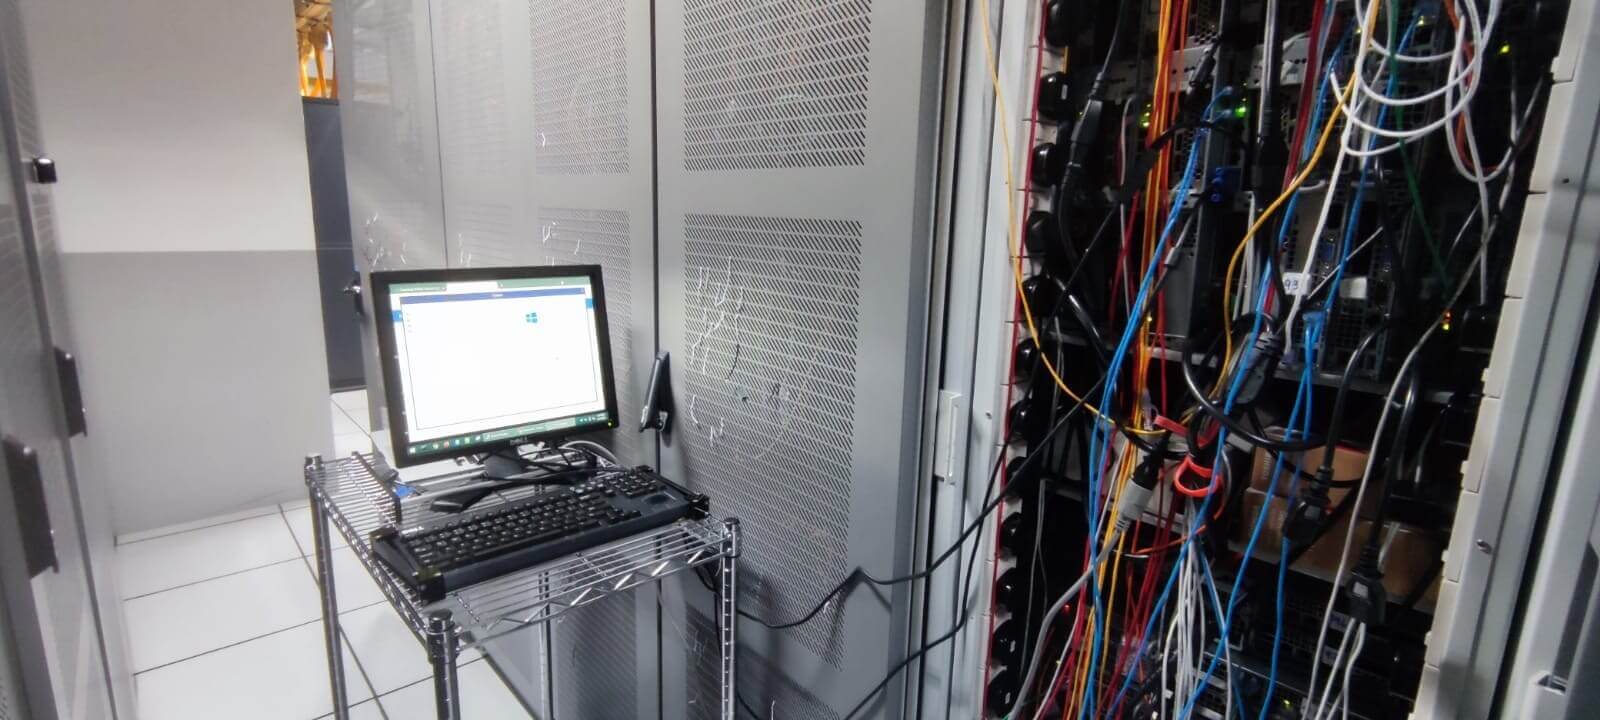 One of our hosts puts their servers in a data center!